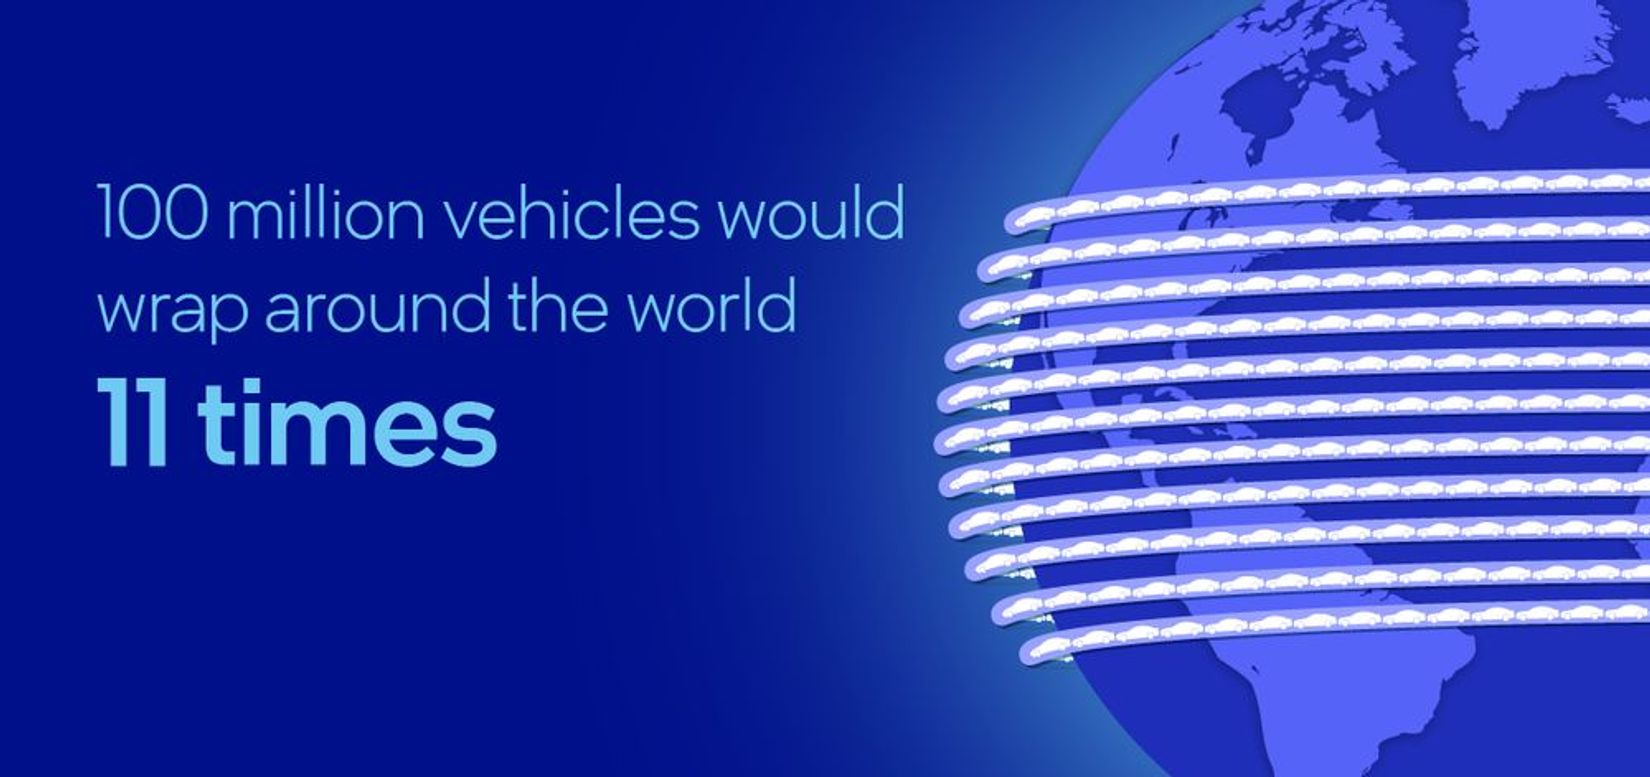 100 million vehicles equipped with Mobileye EyeQ chips would wrap around the world at the equator more than 11 times